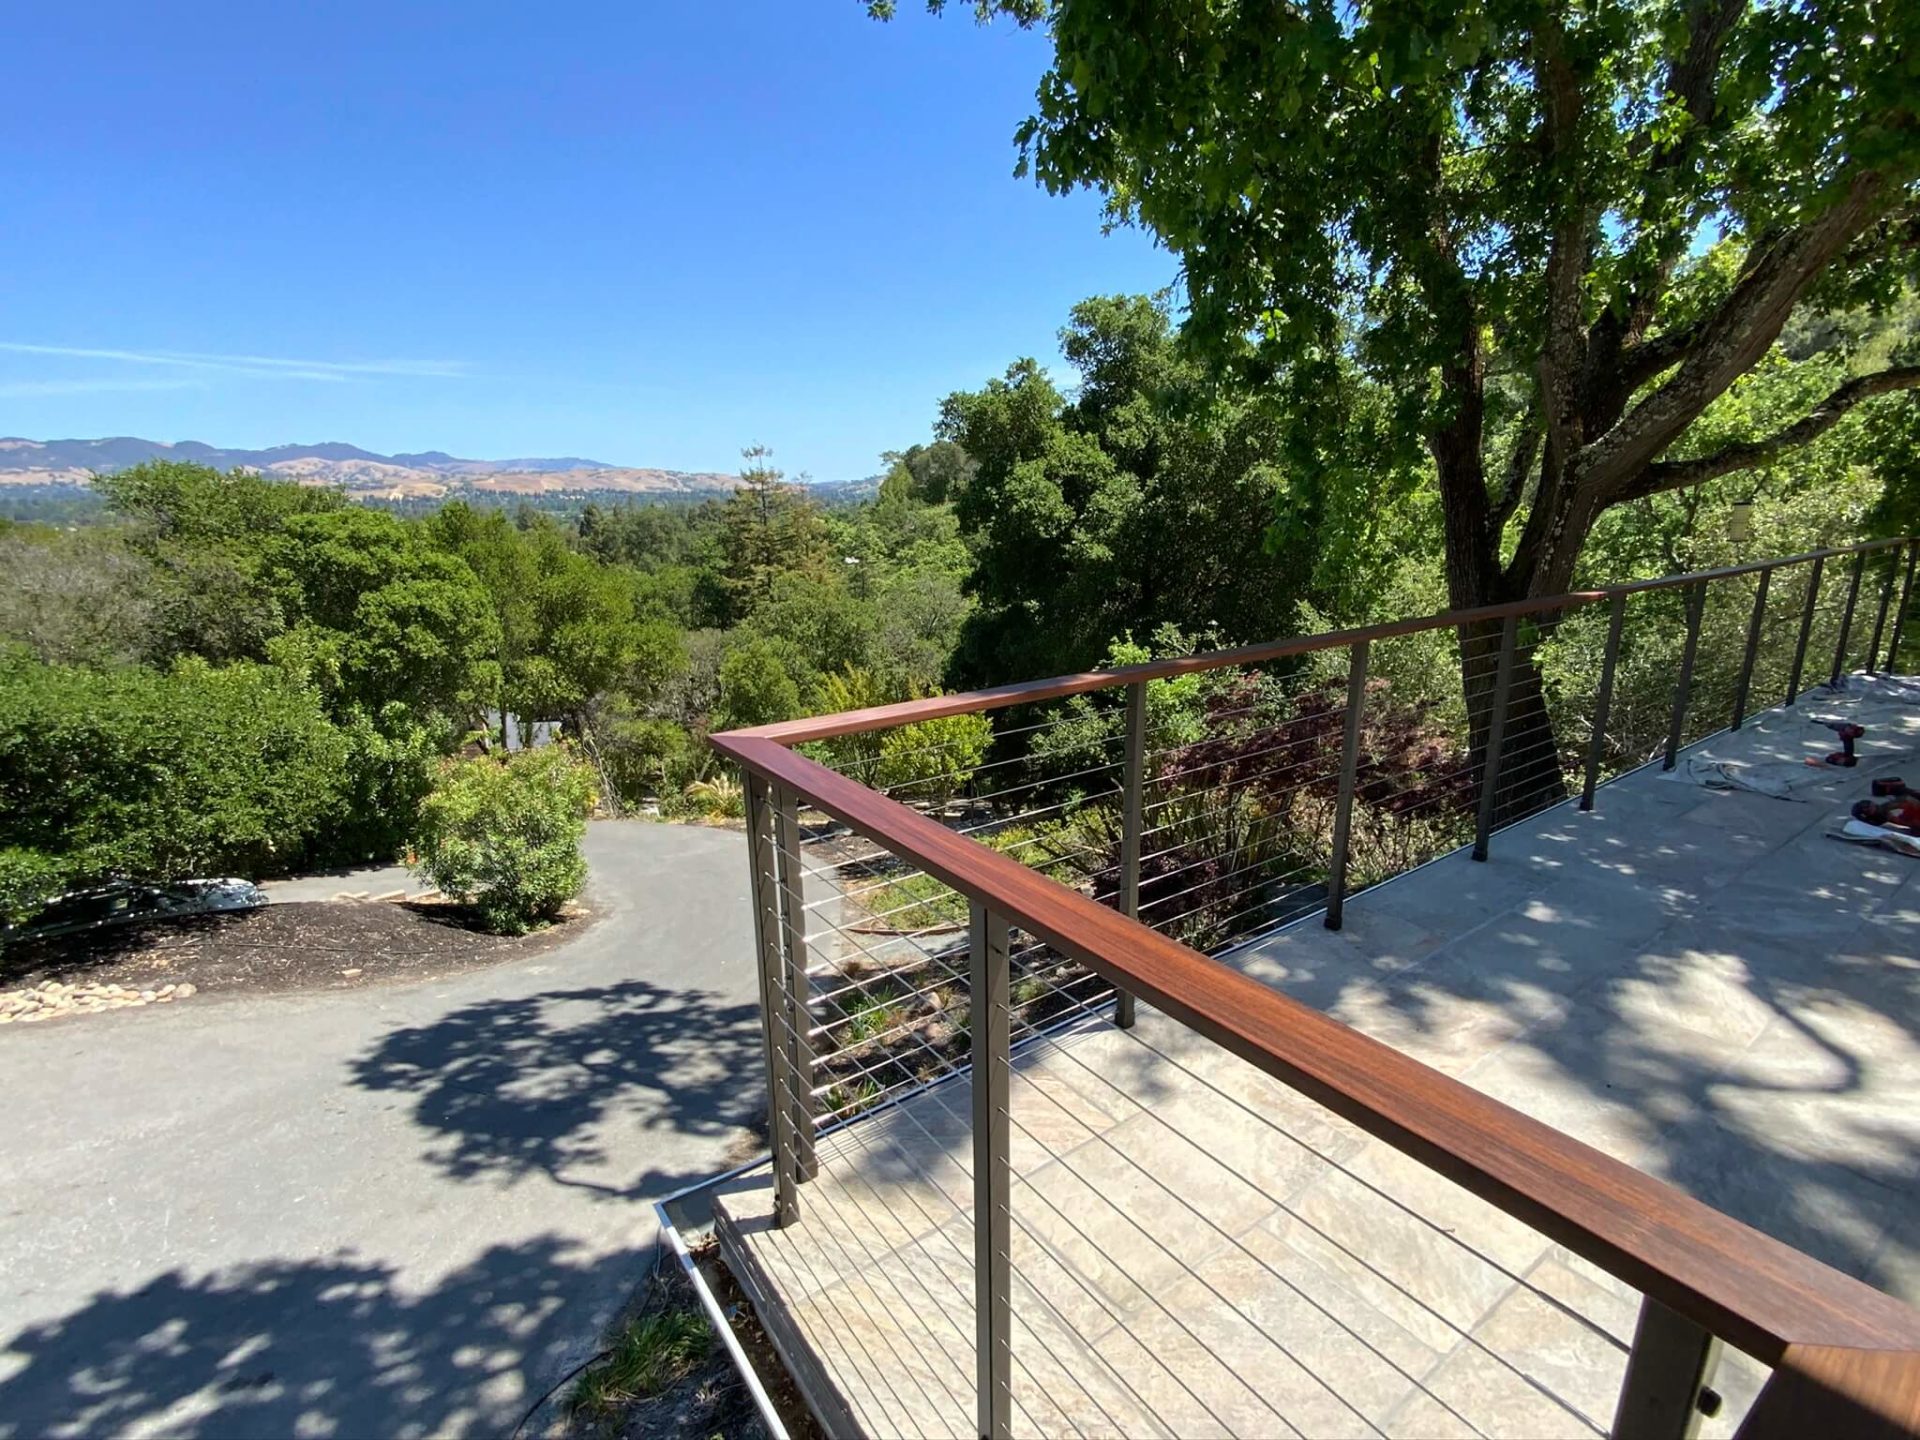 Cable railing system installed in San Rafael, CA with wooden top board and hilltop view